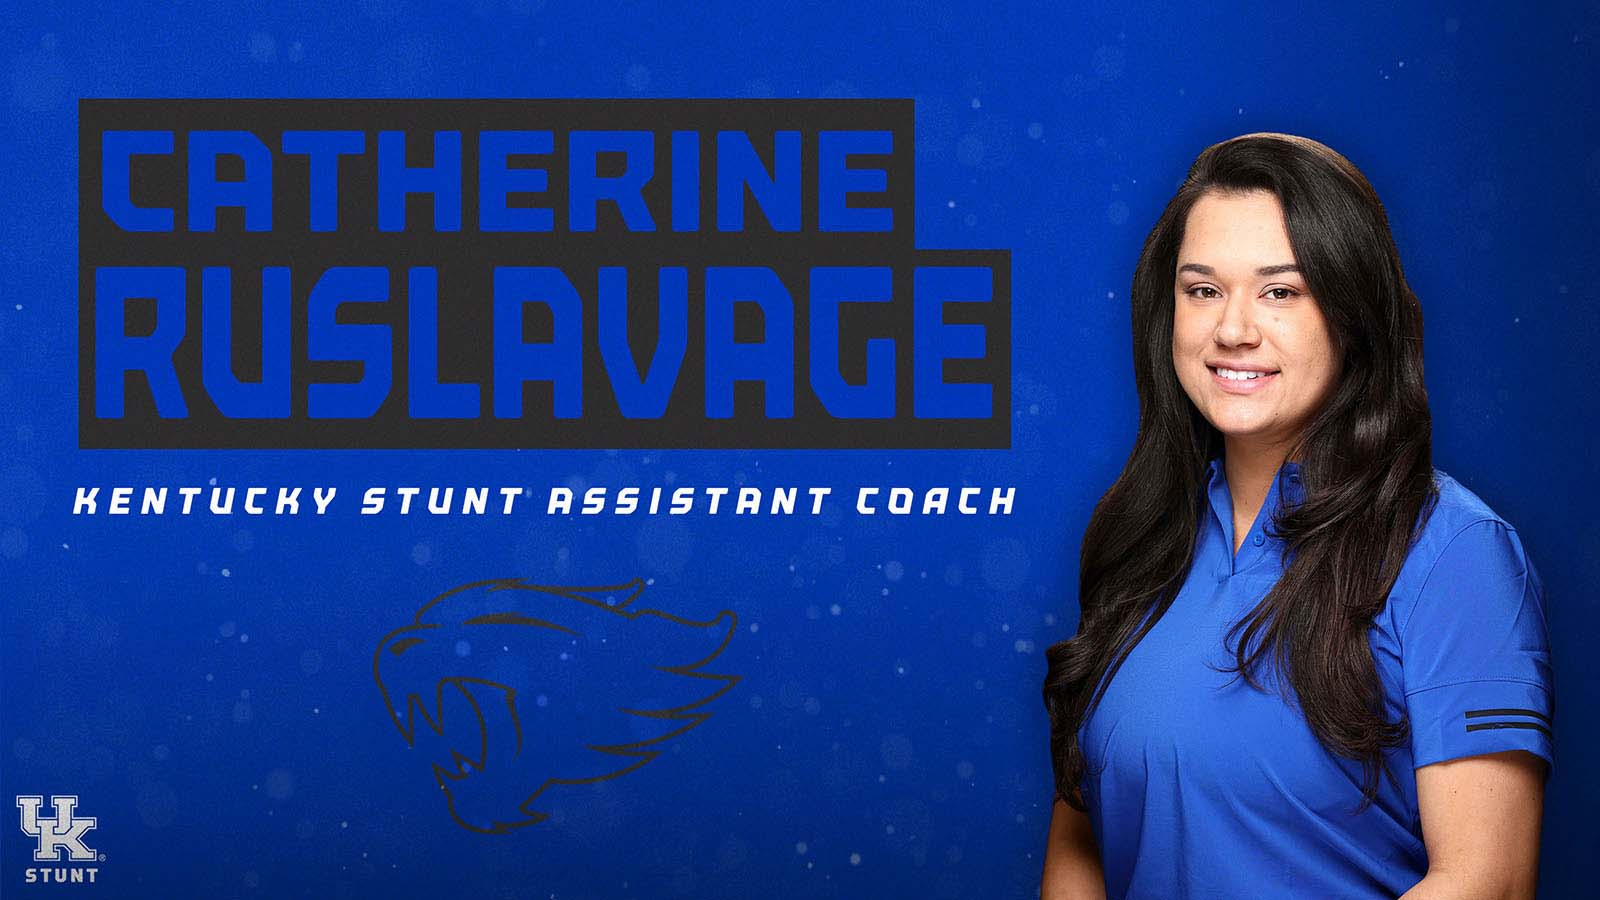 Kentucky STUNT Names Catherine Ruslavage Assistant Coach